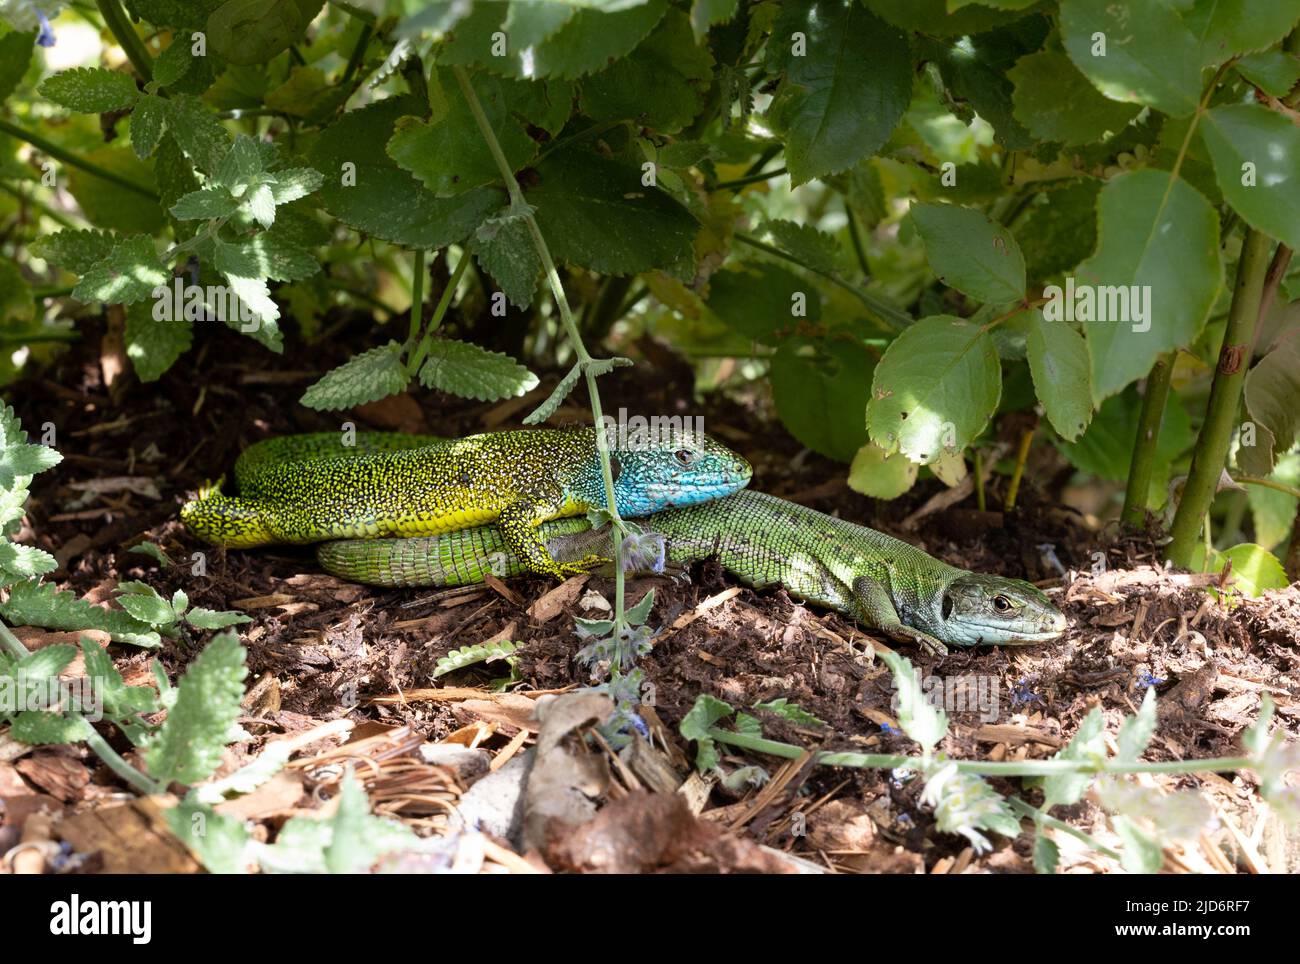 Close-up of a male and female green lizard couple (Lacerta bilineata or Lacerta vivipara, Smaragdeidechse) on wooden ground under some leaves. Male li Stock Photo